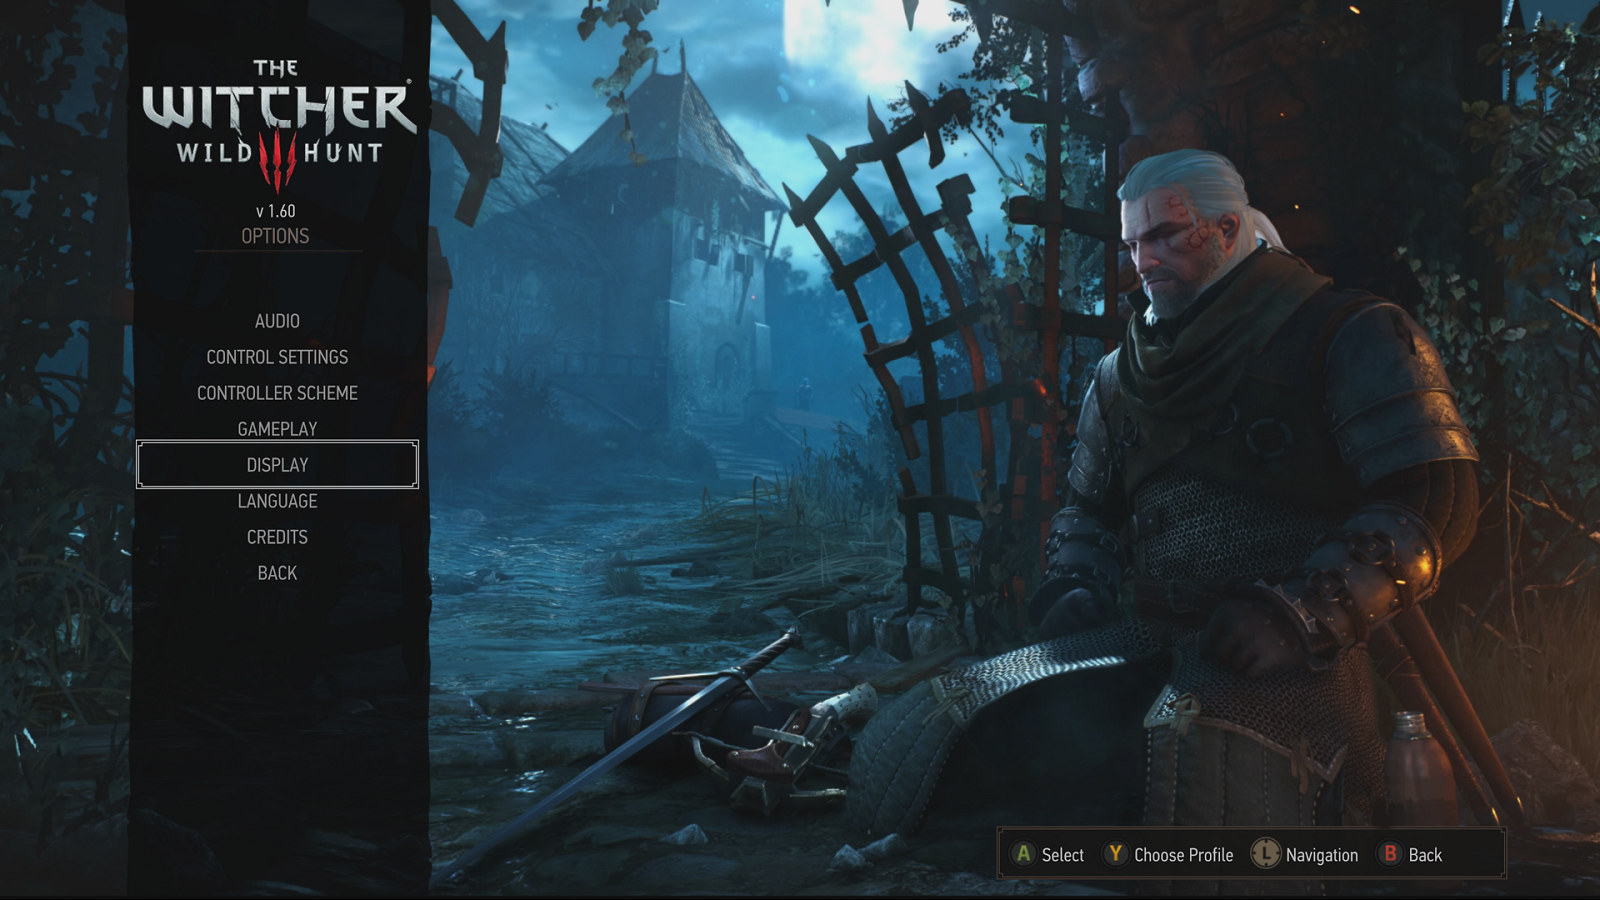 75% The Witcher 3: Wild Hunt on